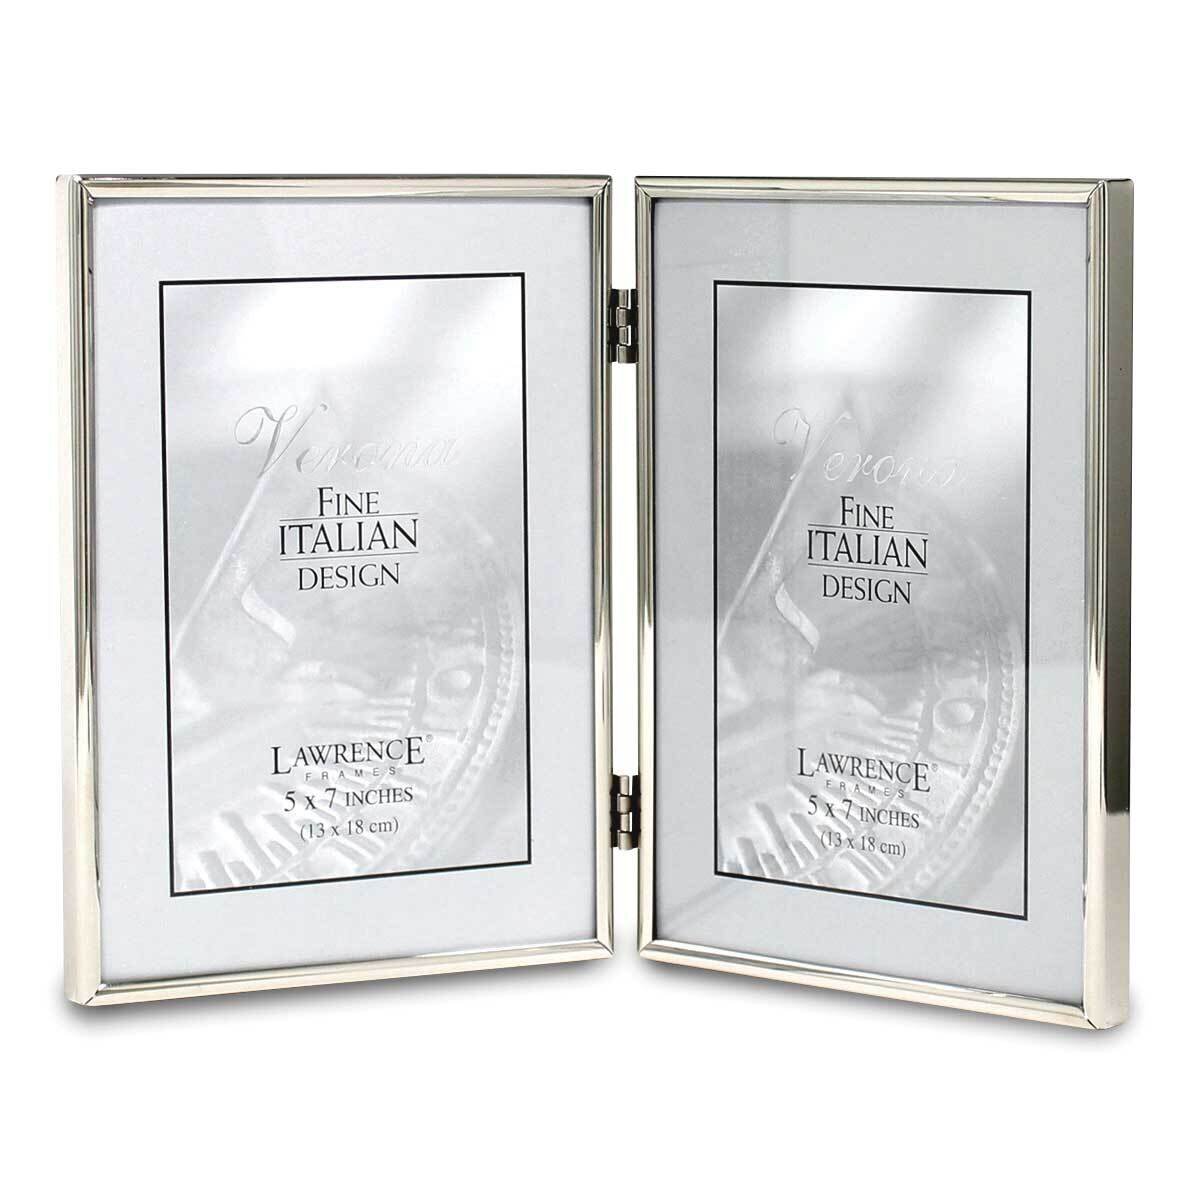 5 x 7 Inch Hinged Double Simply Silver-tone Metal Picture Frame GM22268